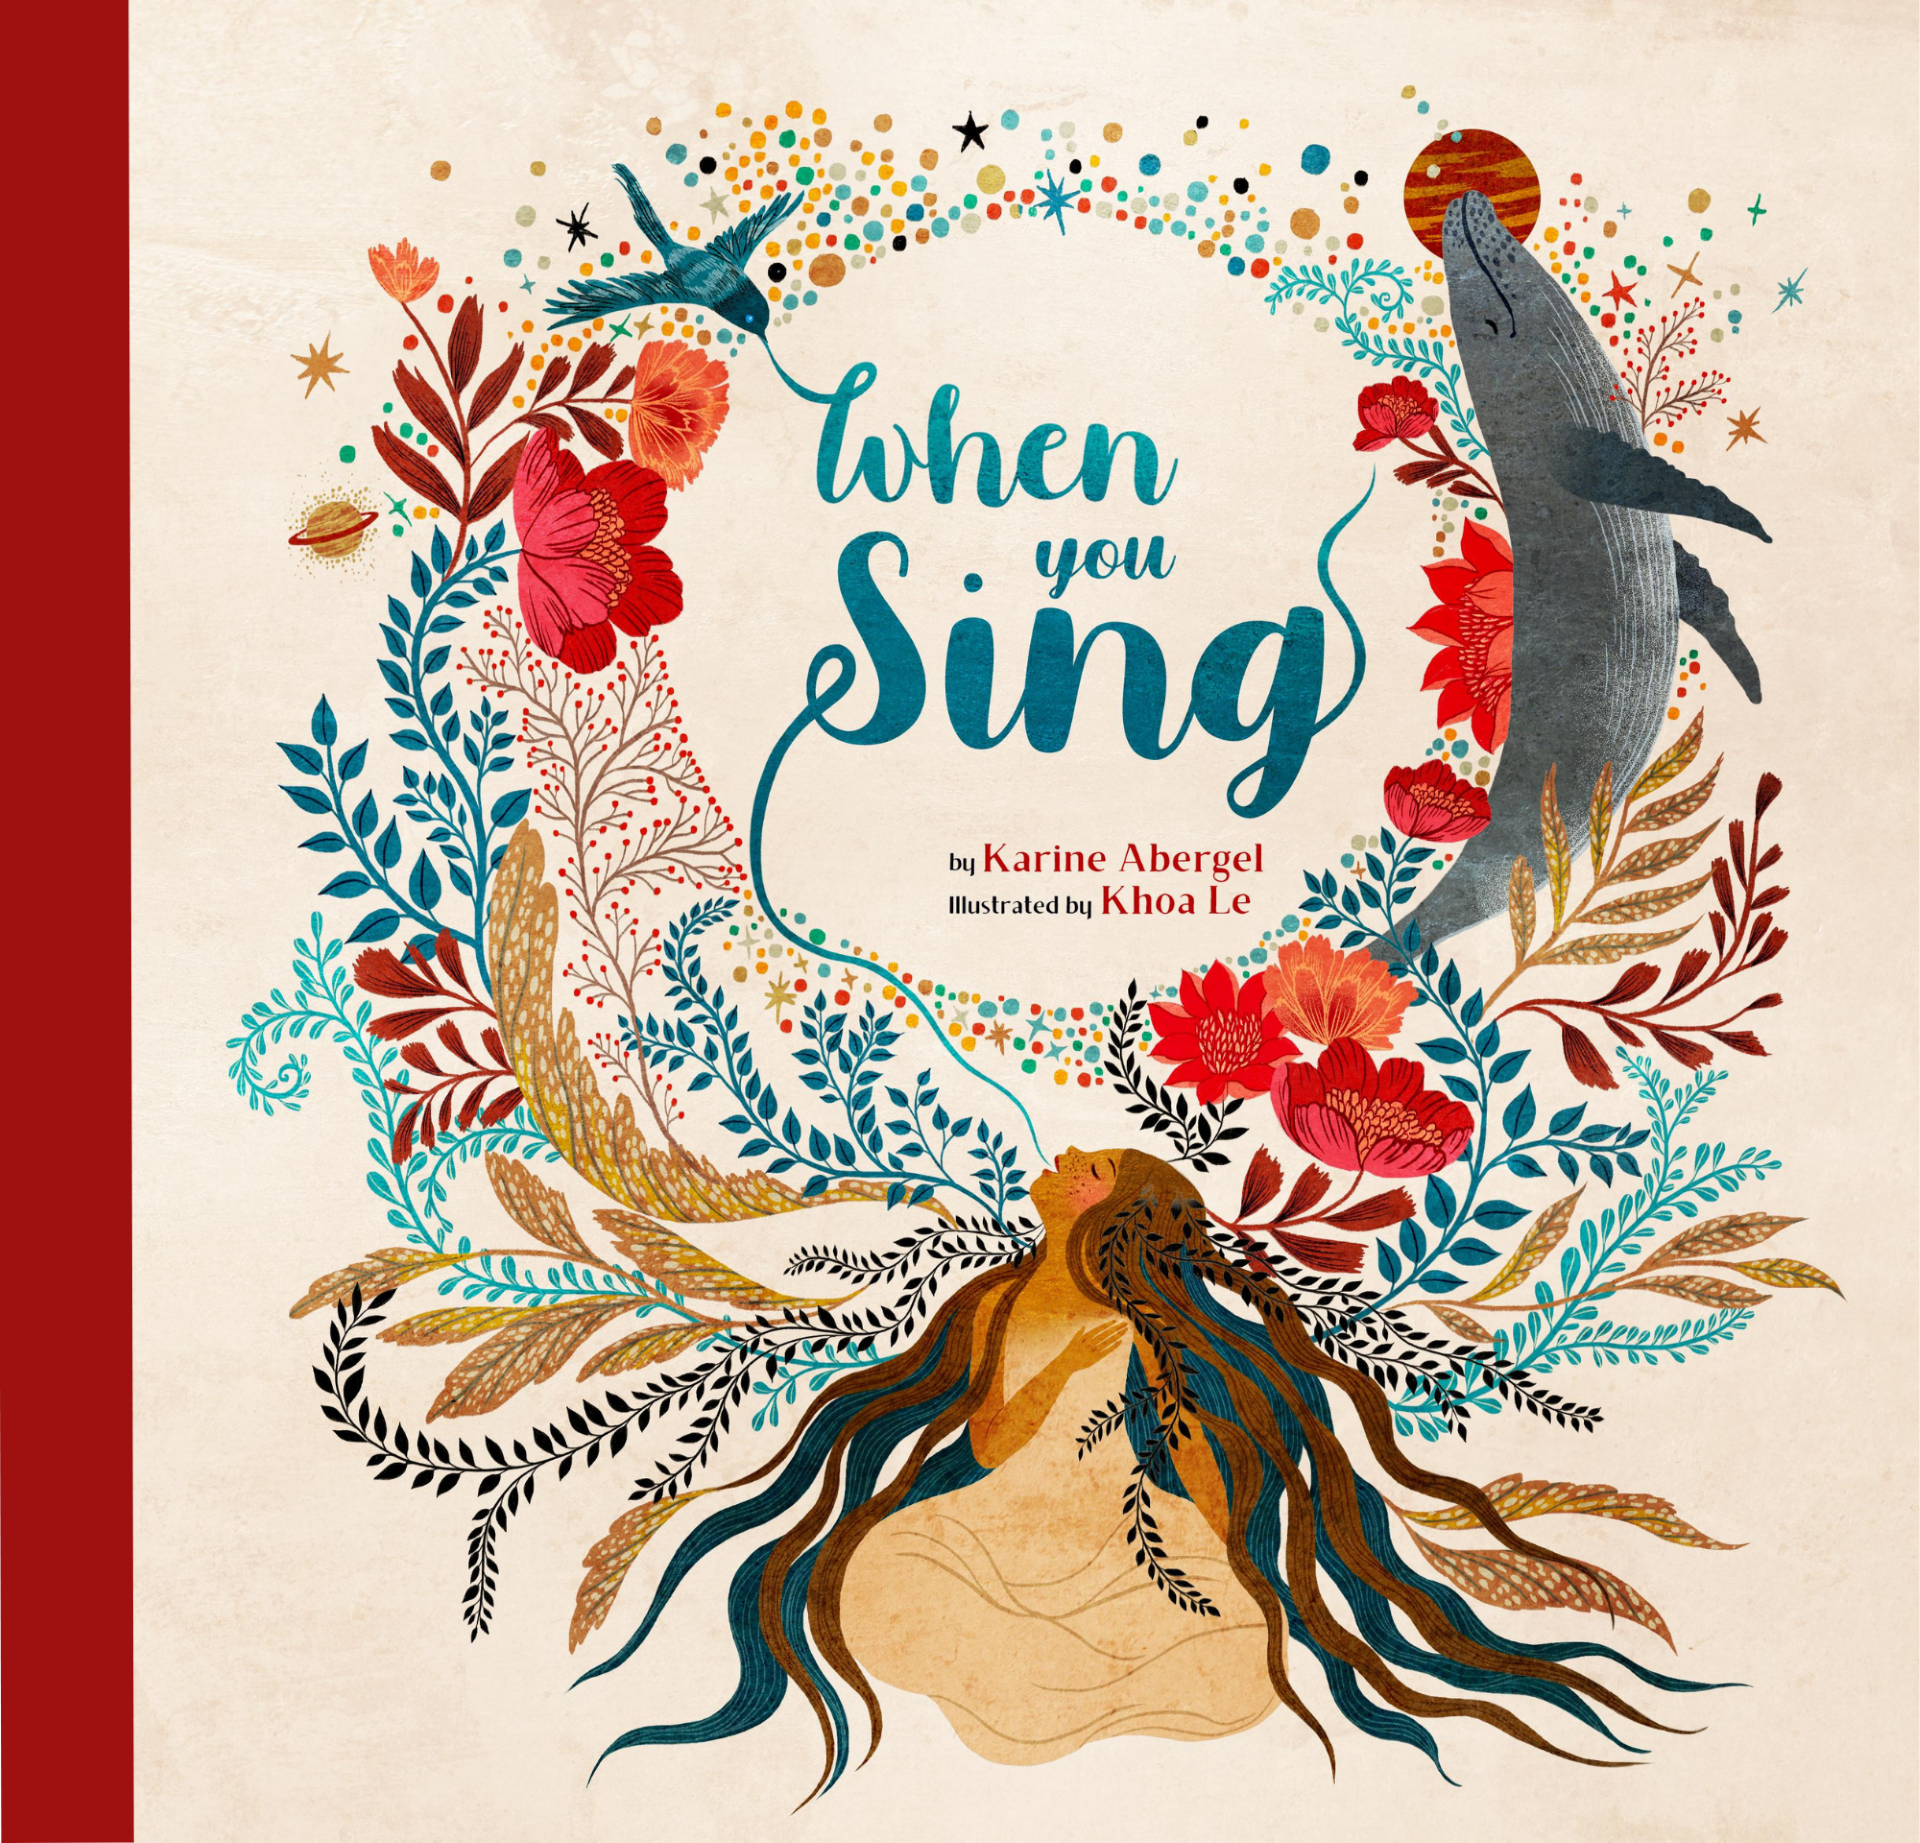 A fanciful illustration of a human figure with very long hair tilts their face upward and appears to be singing. Flowers, a whale, a bird and stars stream around a central circle with the book title, When You Sing.